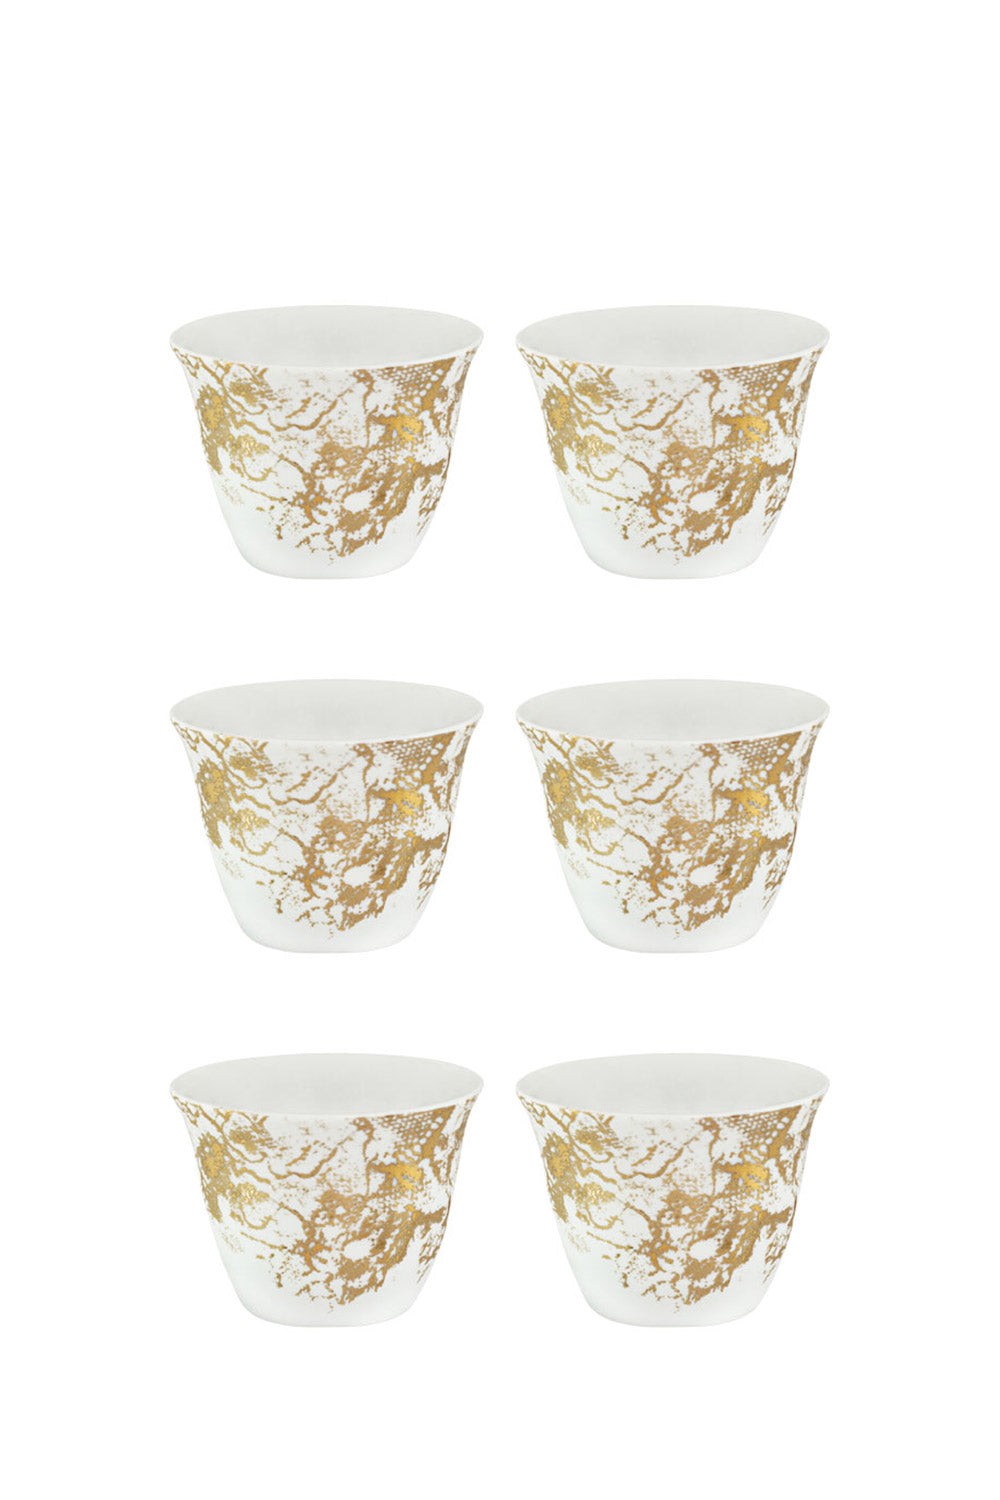 Belle Epoque Gawa Cup 50 ml, Set of 6, White/Gold